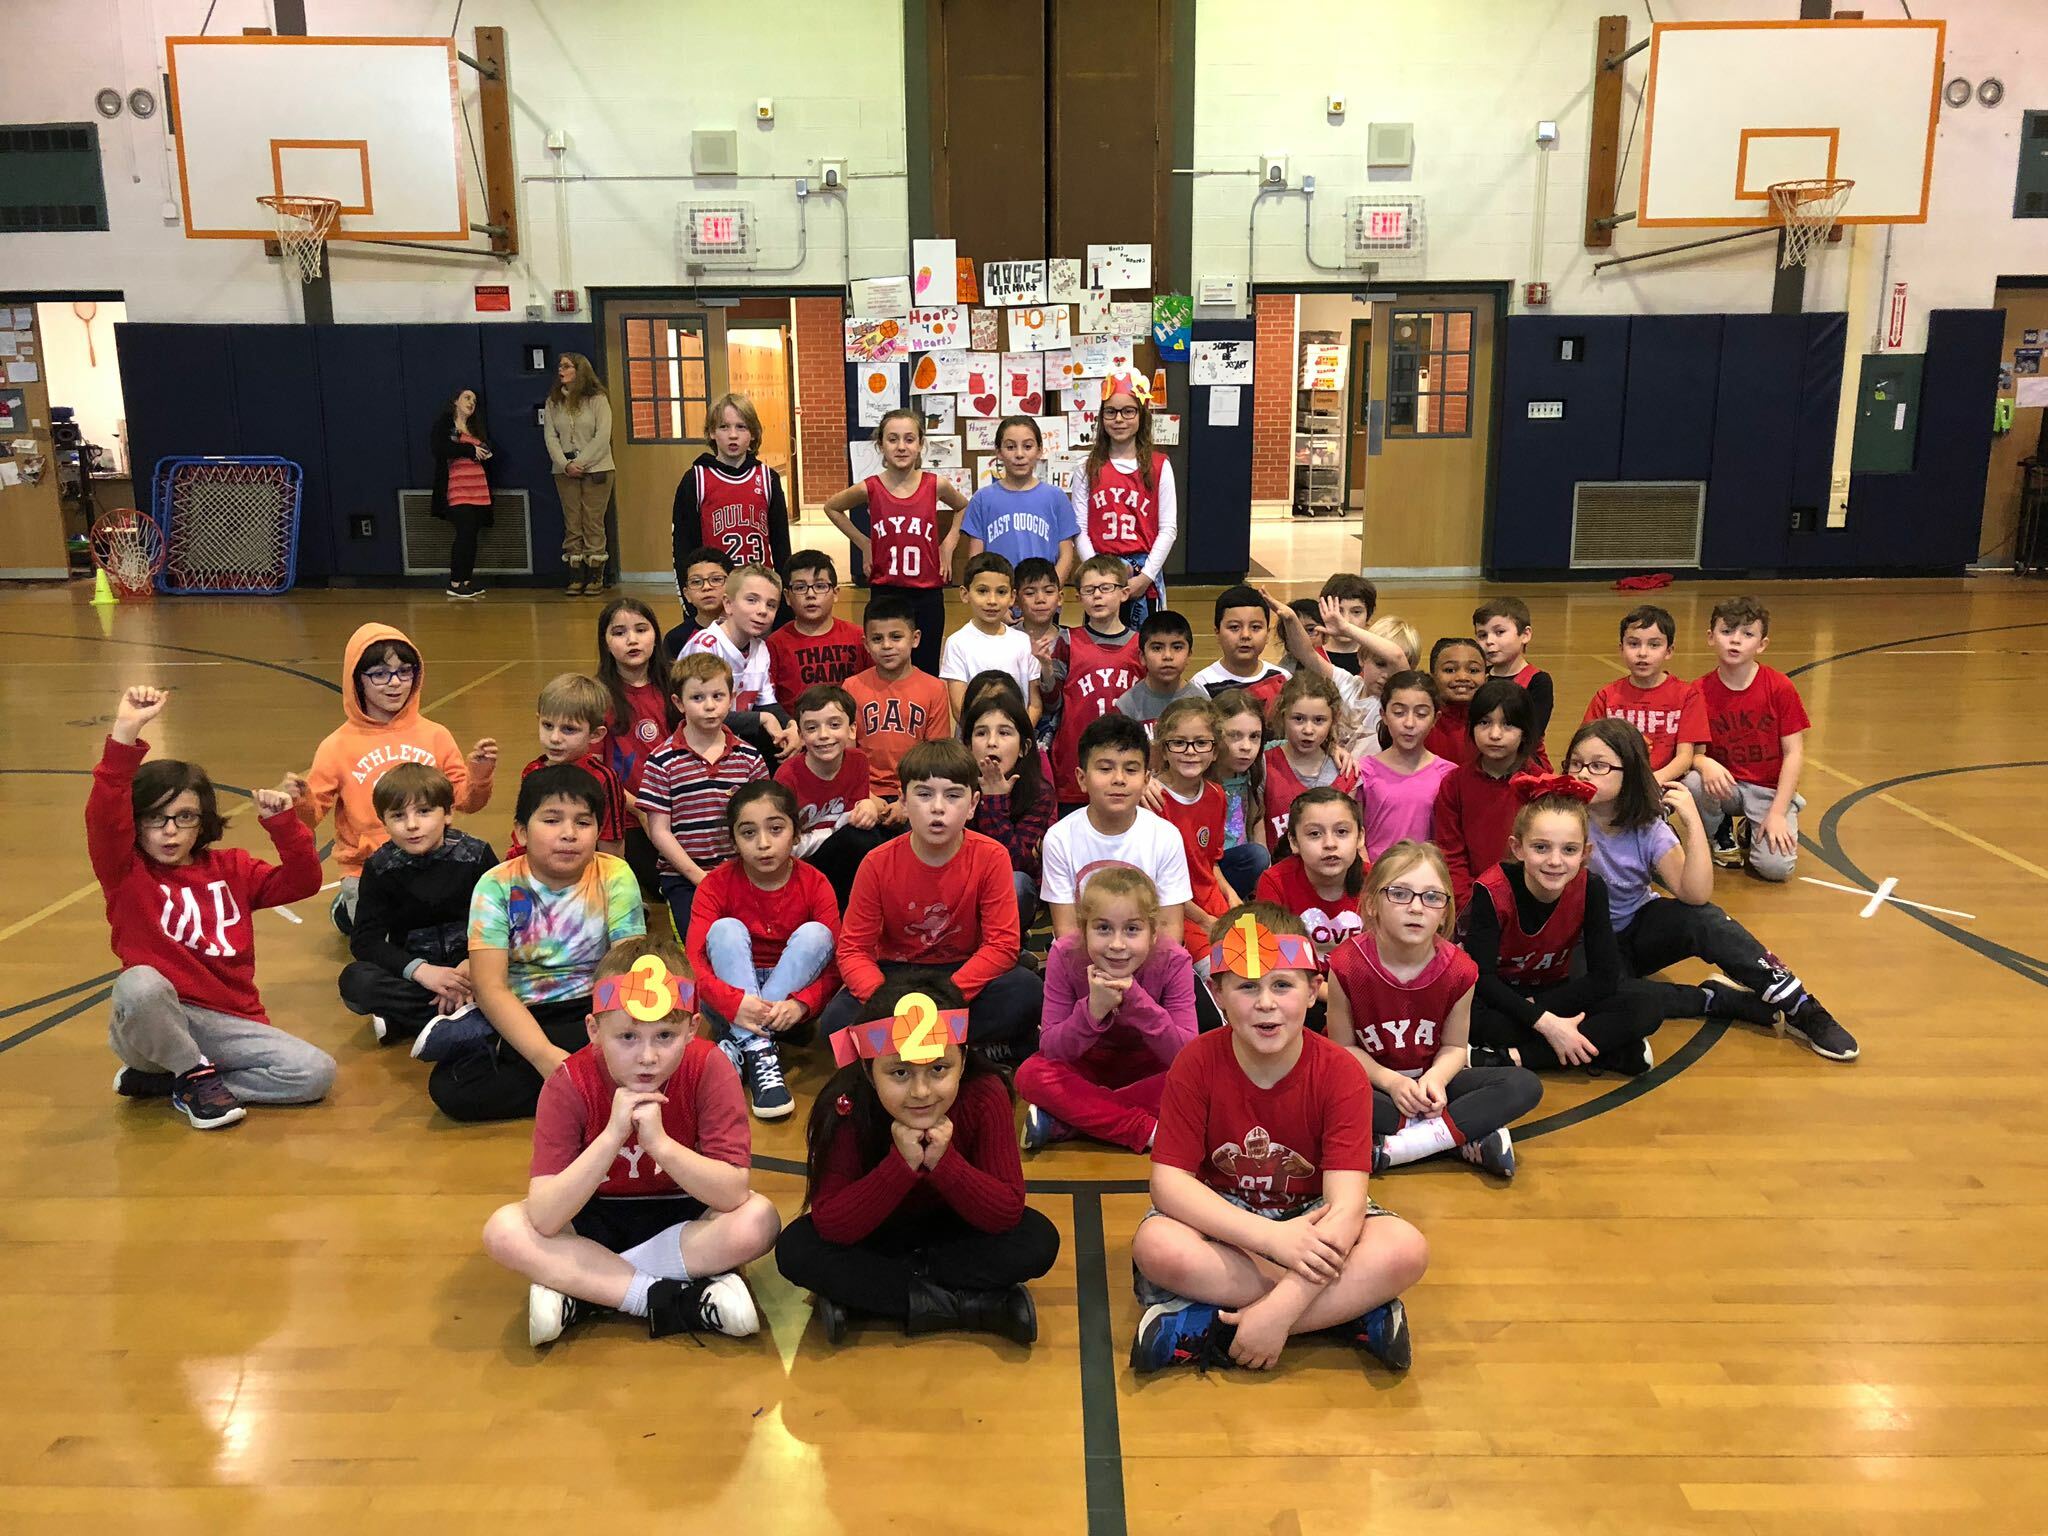 East Quogue Elementary School students recently participated in the Hoops for Heart challenge to benefit the American Heart Association, raising nearly $300.